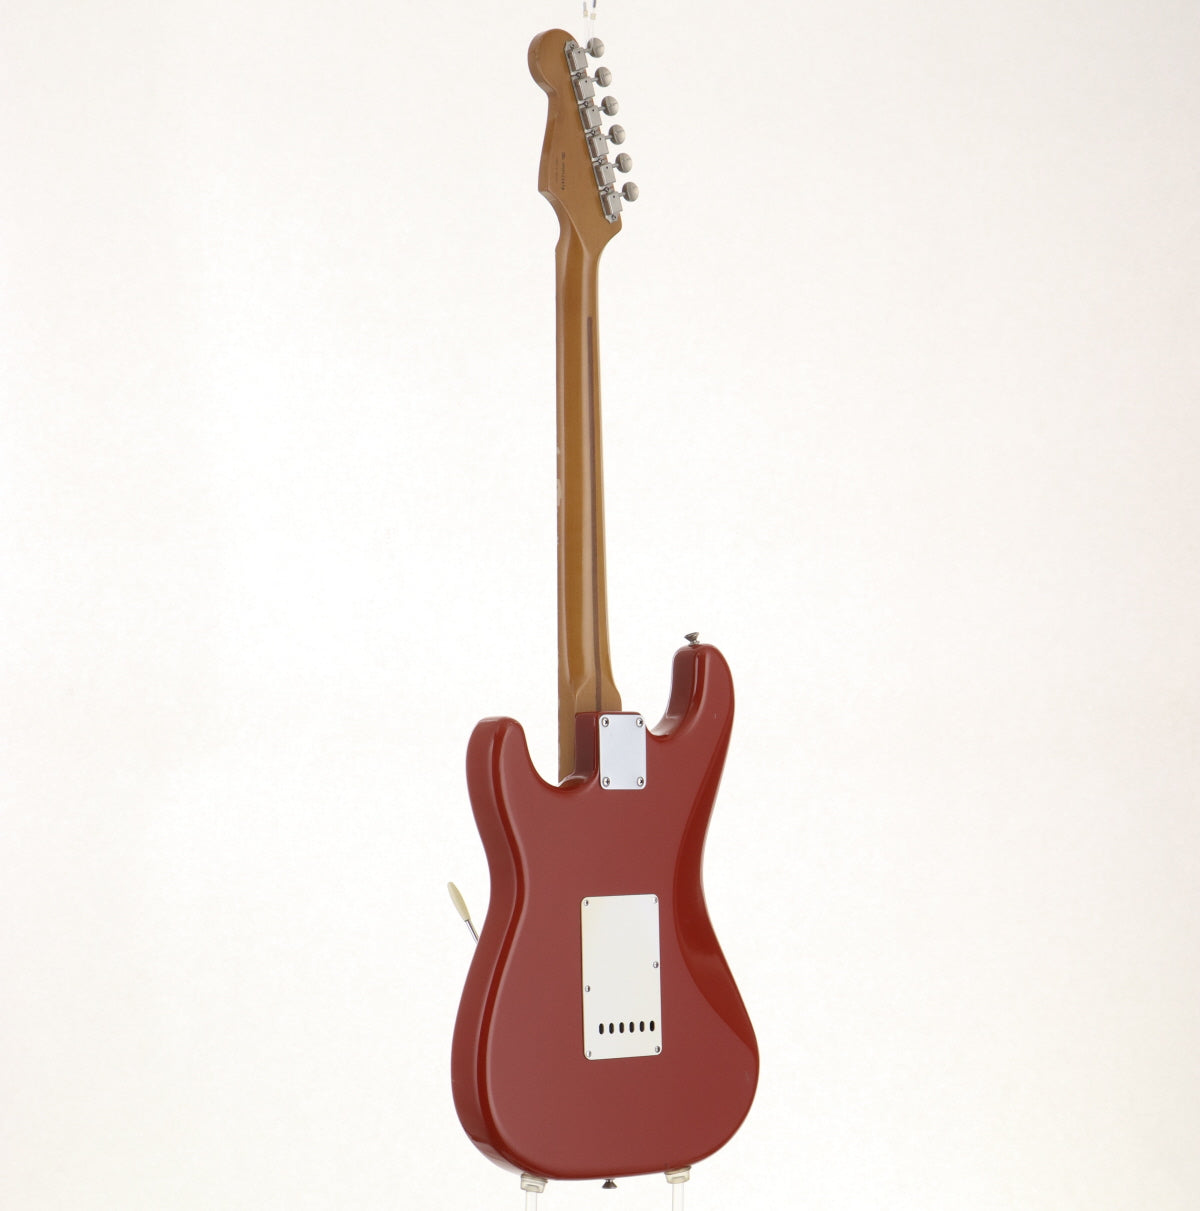 [SN MN9123478] USED Fender / Classic Series 50s Stratocaster Fiesta Red [06]